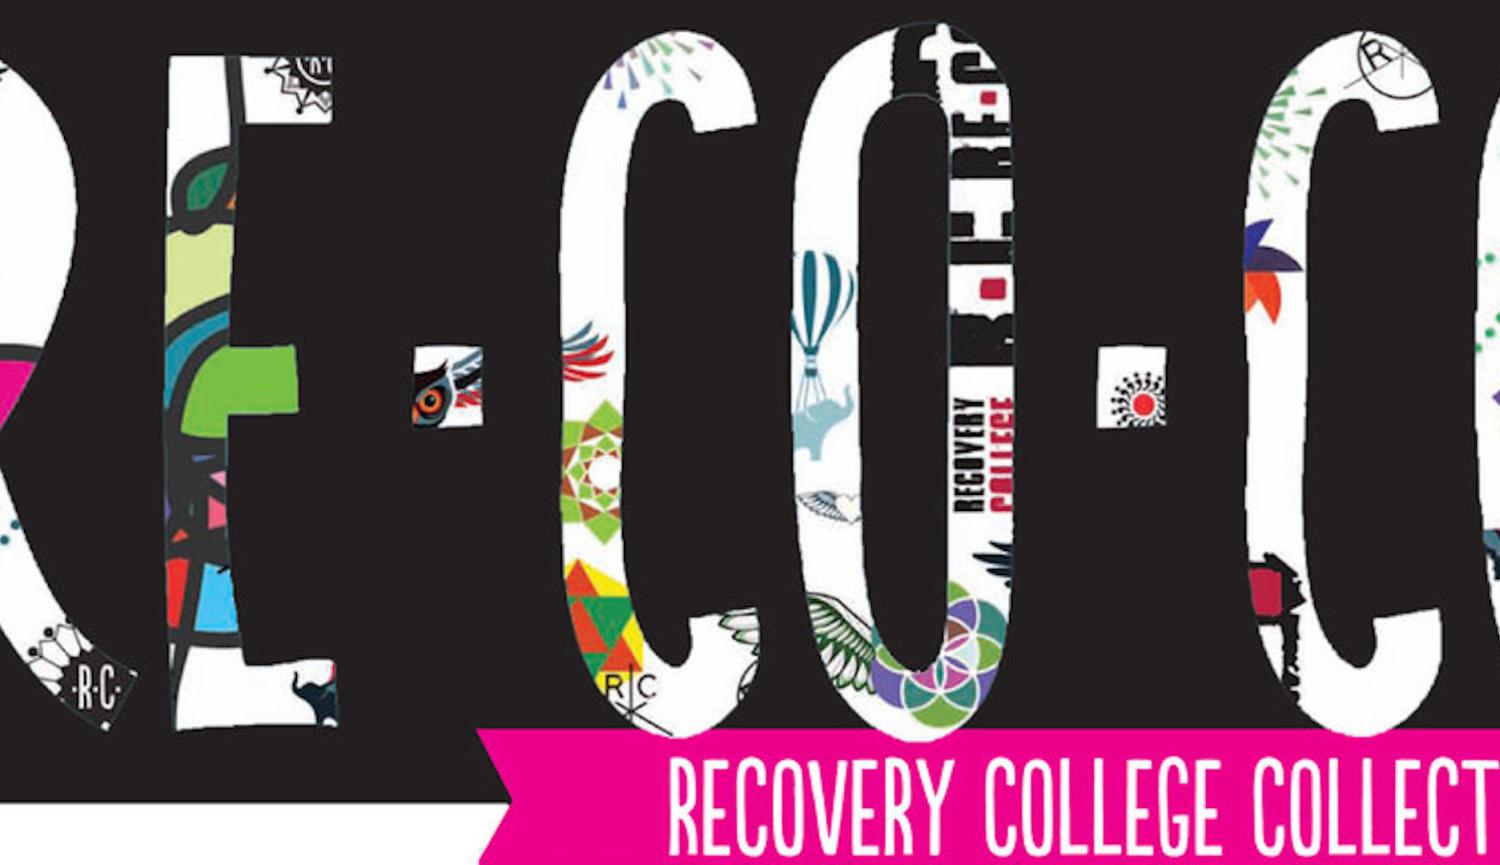 Recovery College Collective logo - Re-Co-Co